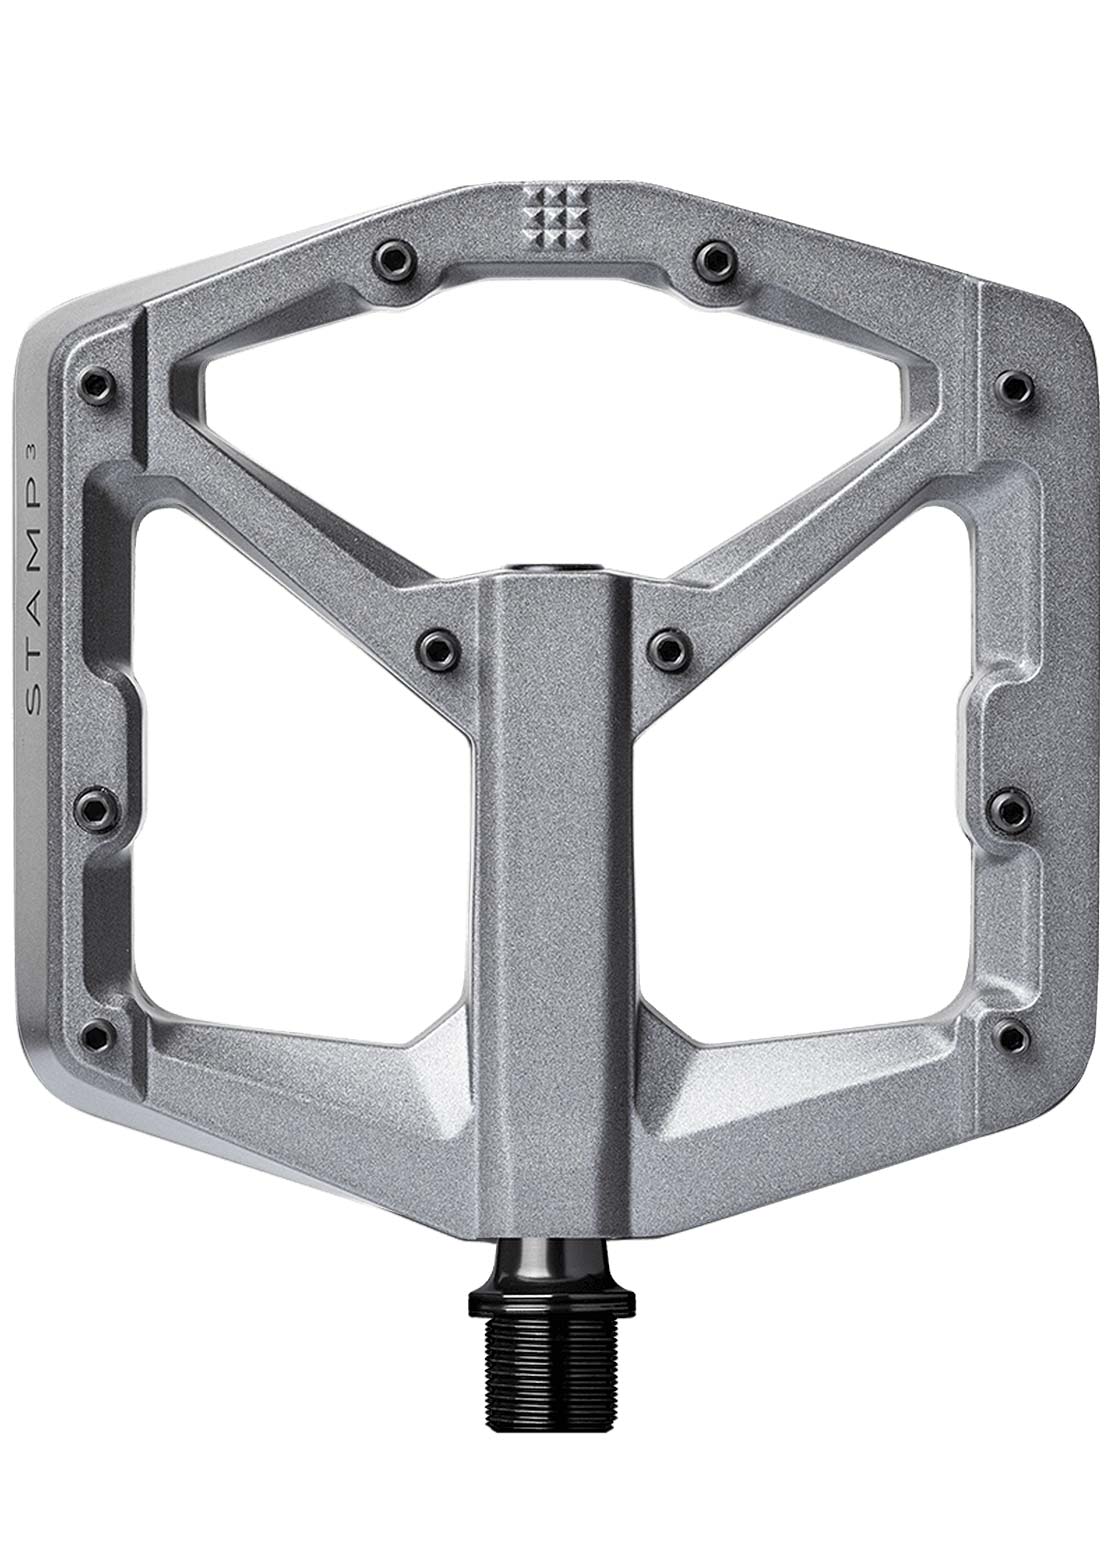 Crank Brothers Stamp 3 Large Flat Mountain Bike Pedals Charcoal